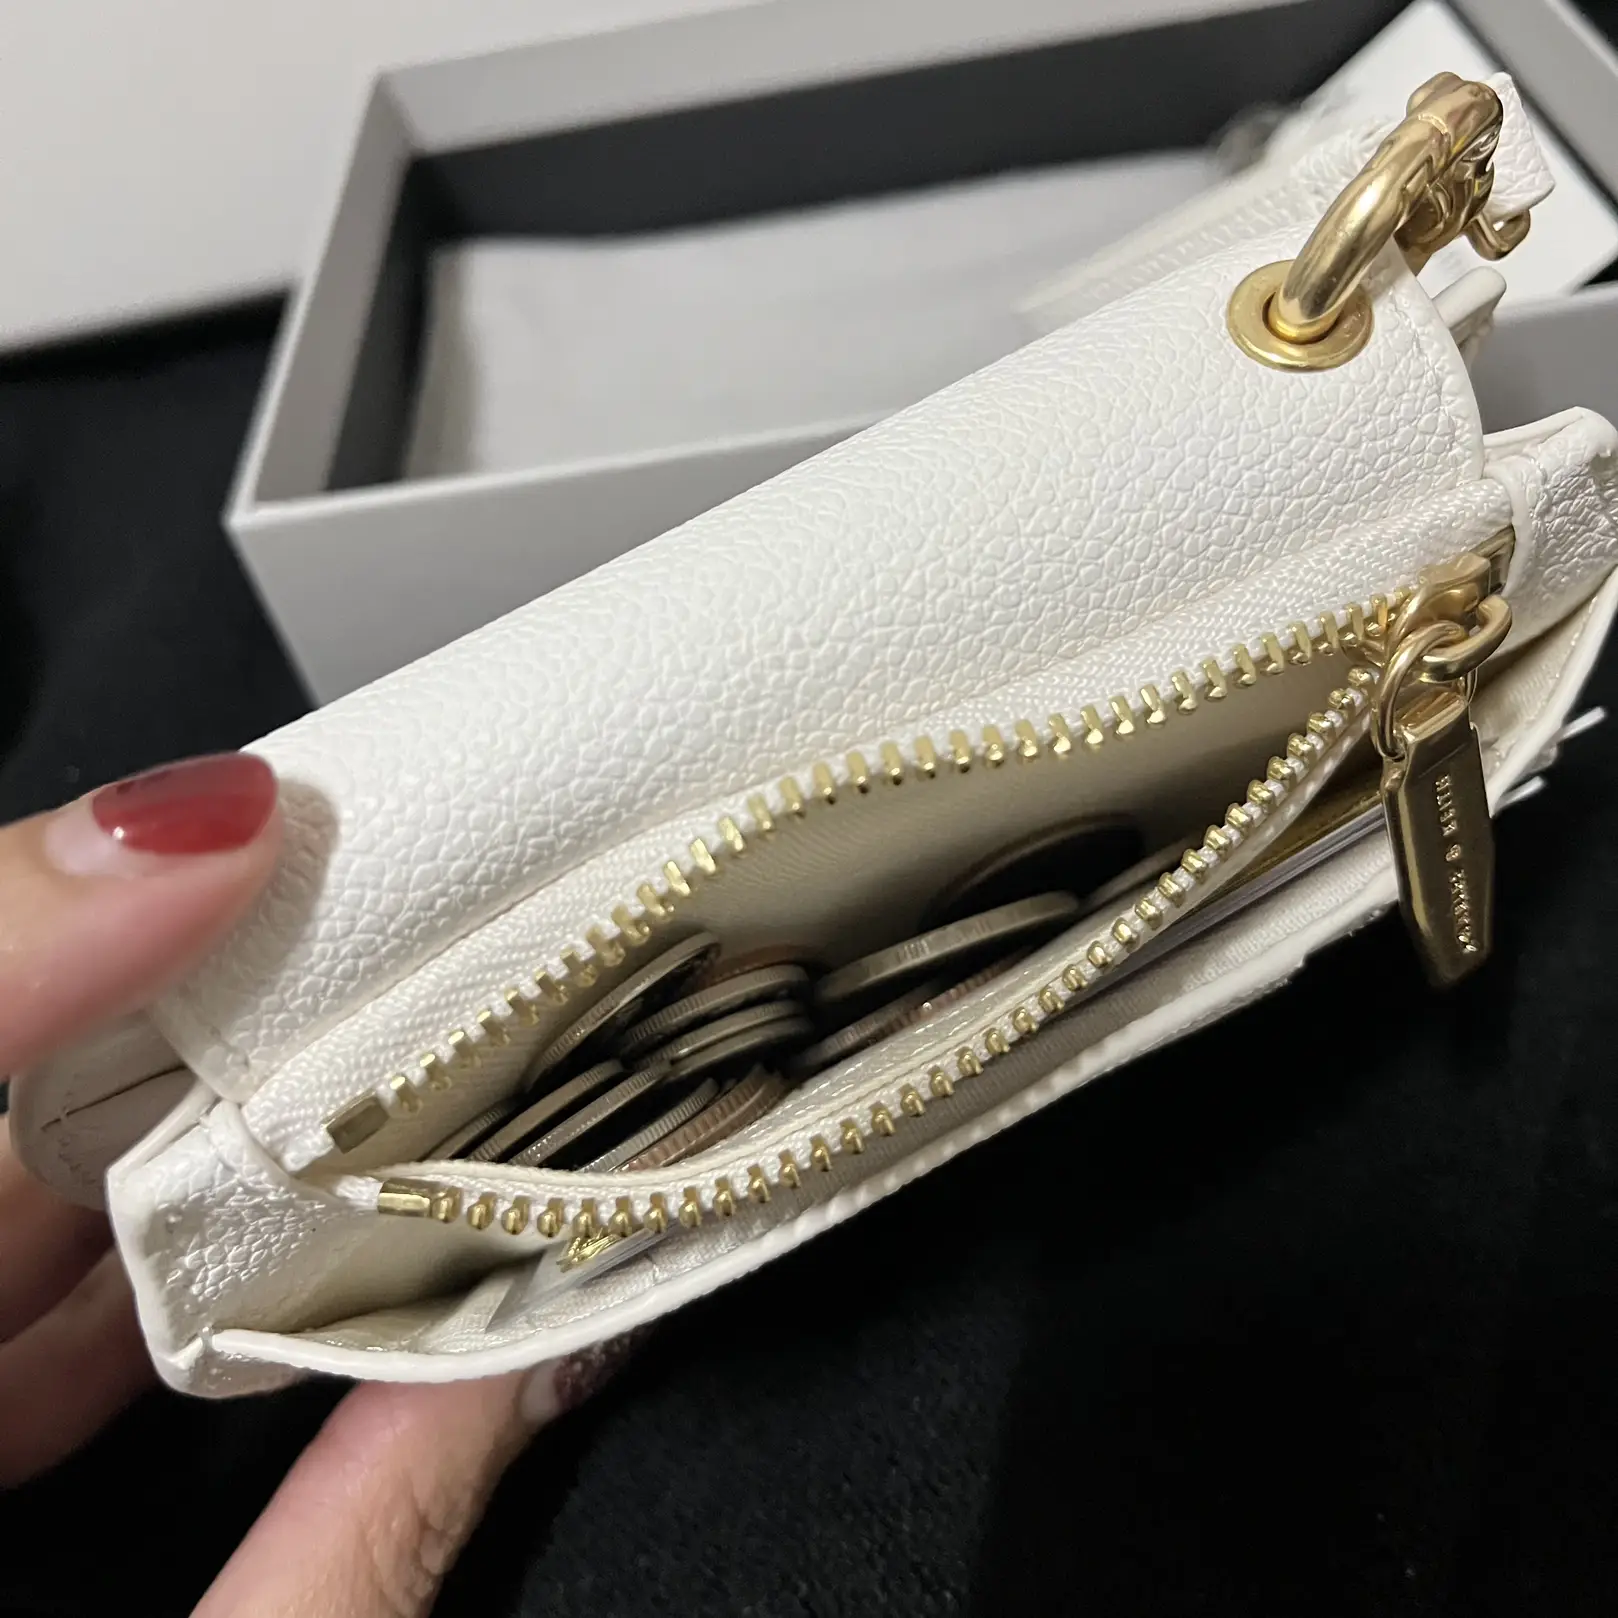 GUCCI KEYCHAIN WALLET REVIEW